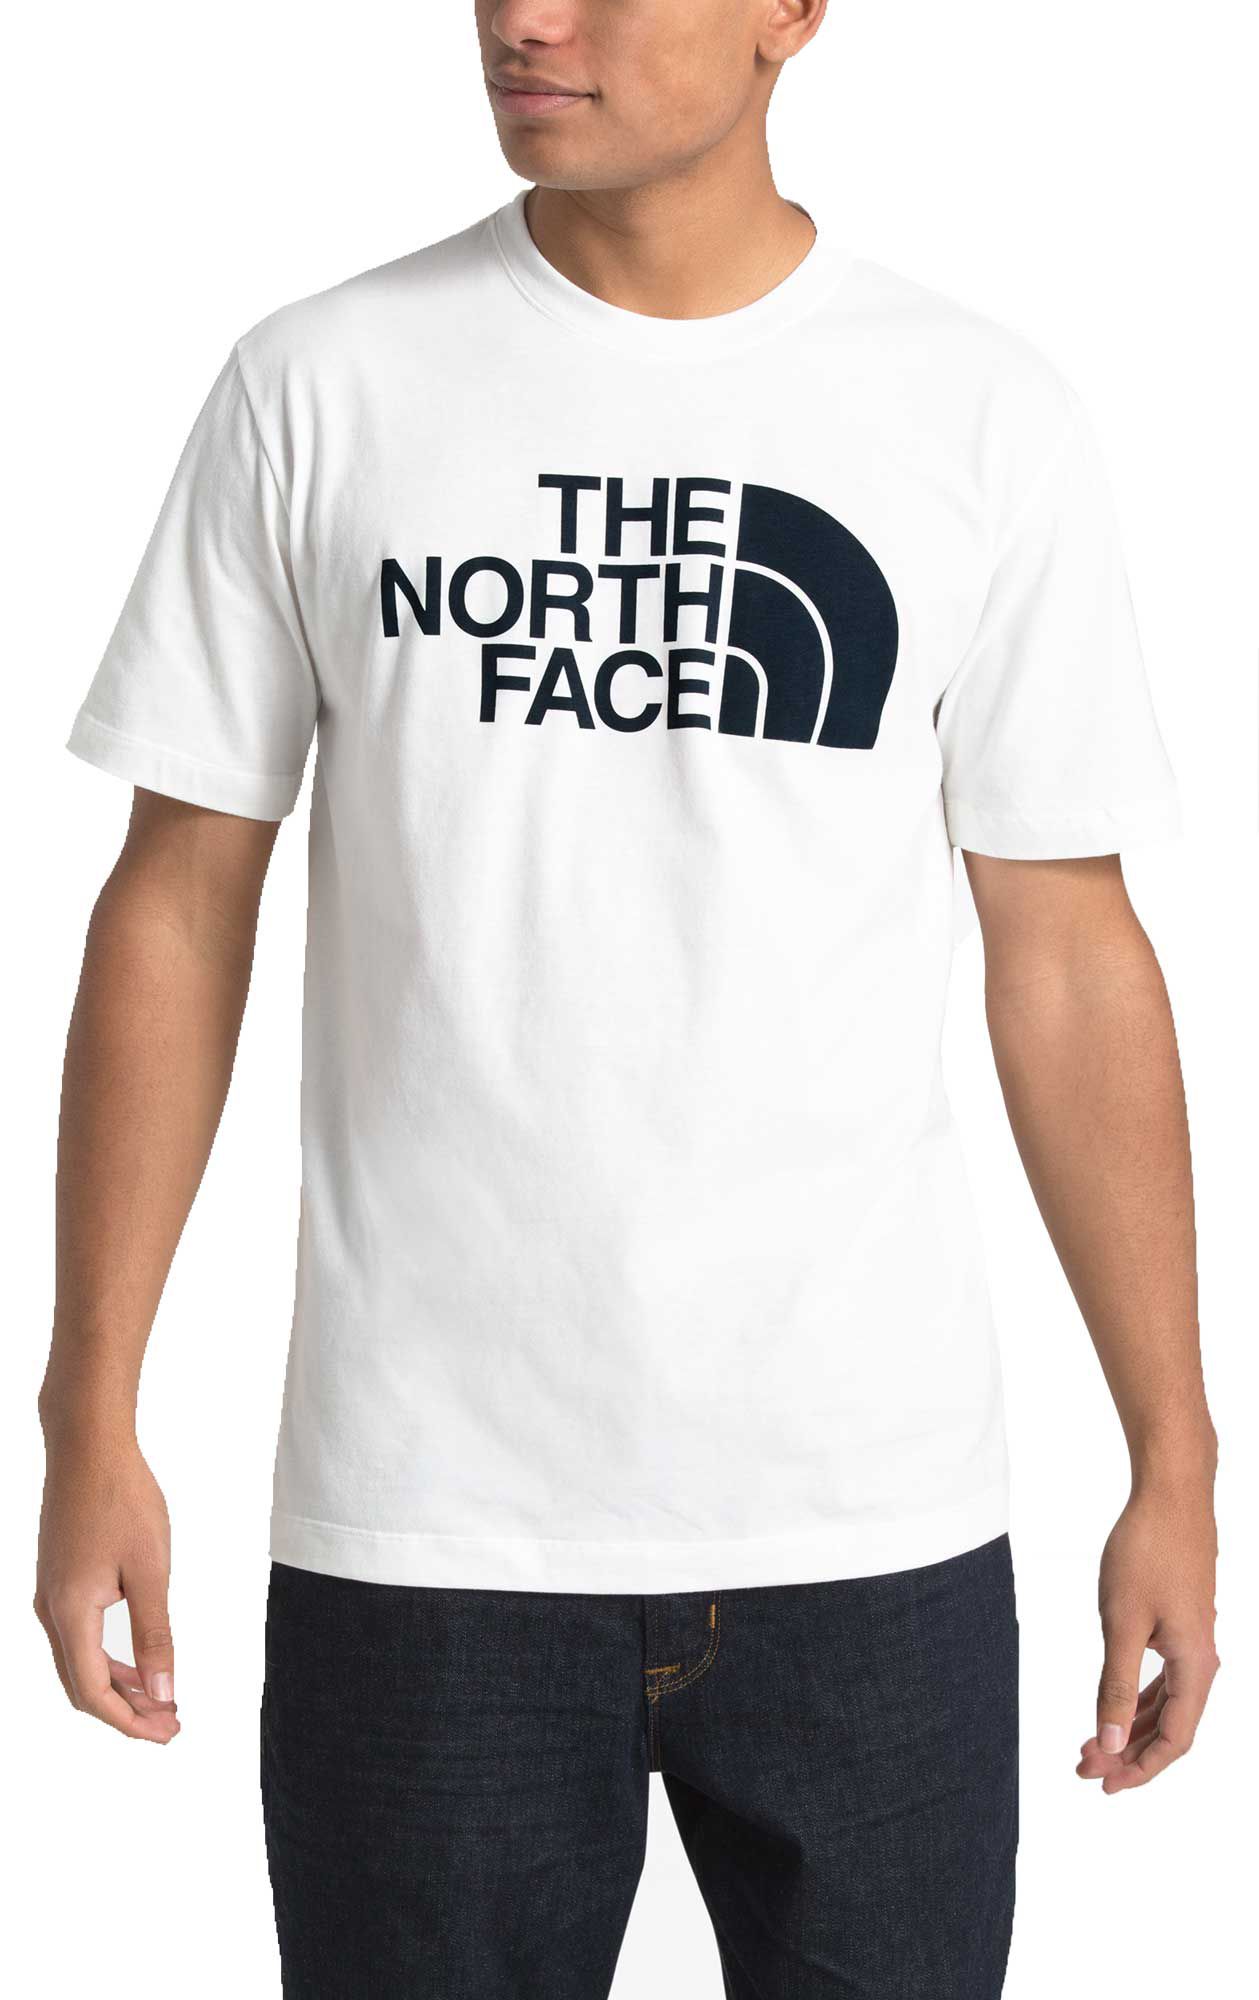 The North Face Men's Short Sleeve Half Dome T-Shirt - .50